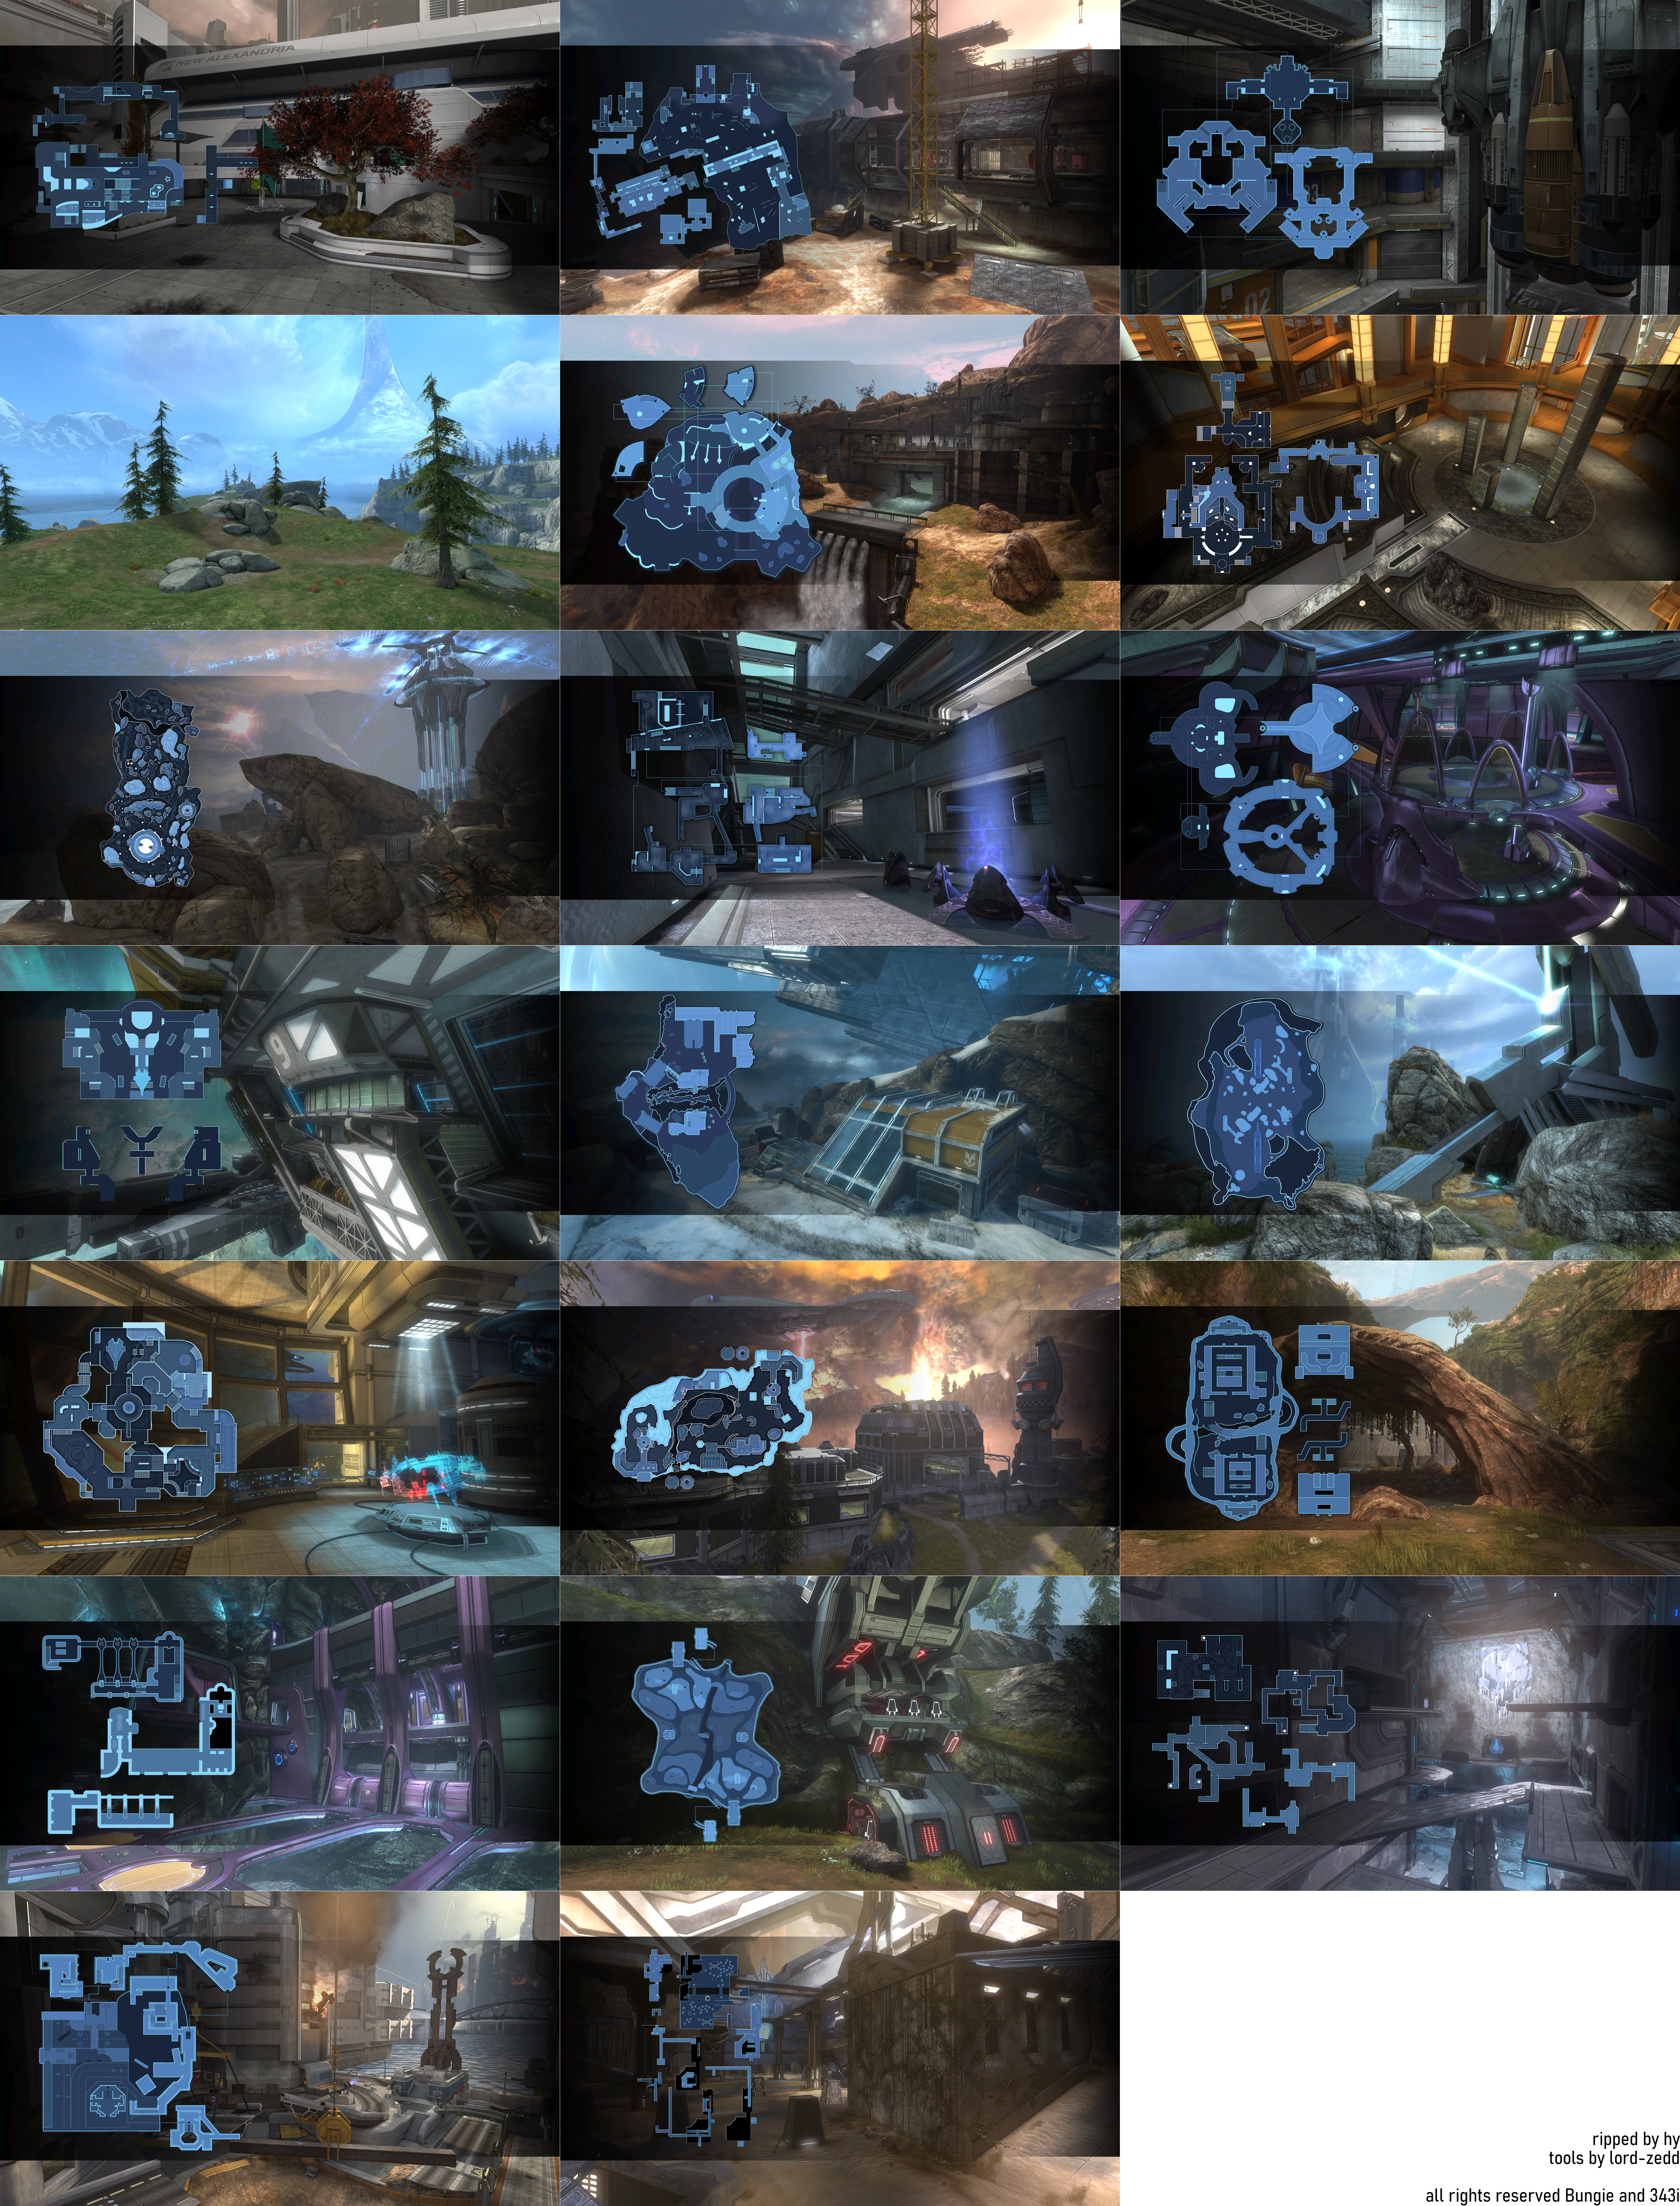 Halo: Reach Multiplayer Level Loading Screens